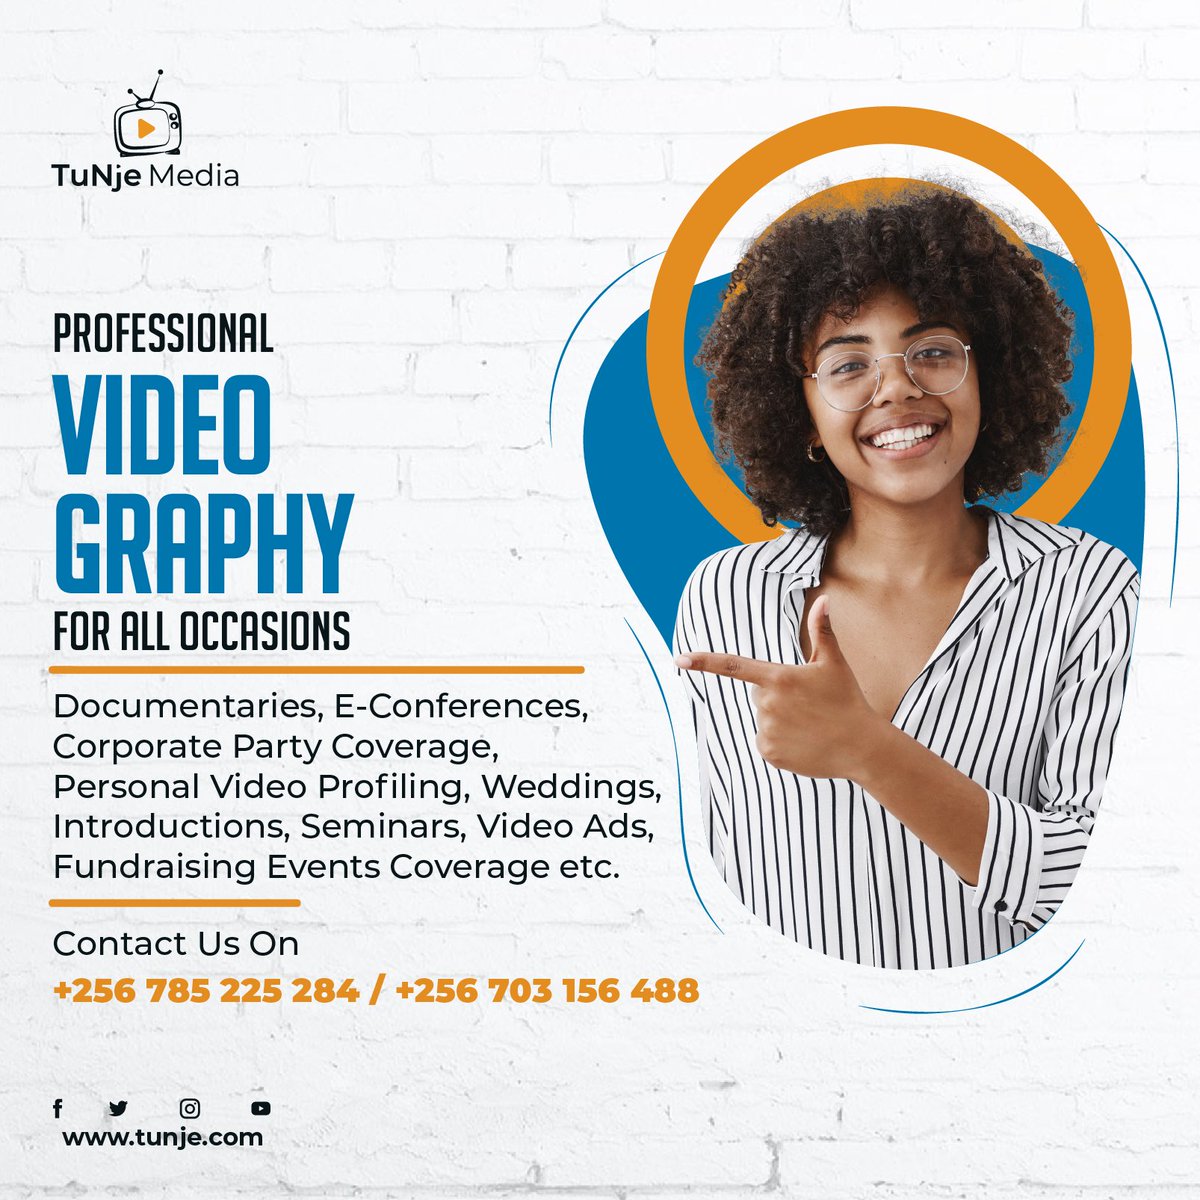 Are planning an event and looking for the right company to handle the event's videography 💁
 
Tunje media is has got you😊 contact us for quality professional videography services.

Reach us out on Info@tunje.com
tunje.com
#videographyservices
#Mediaservices